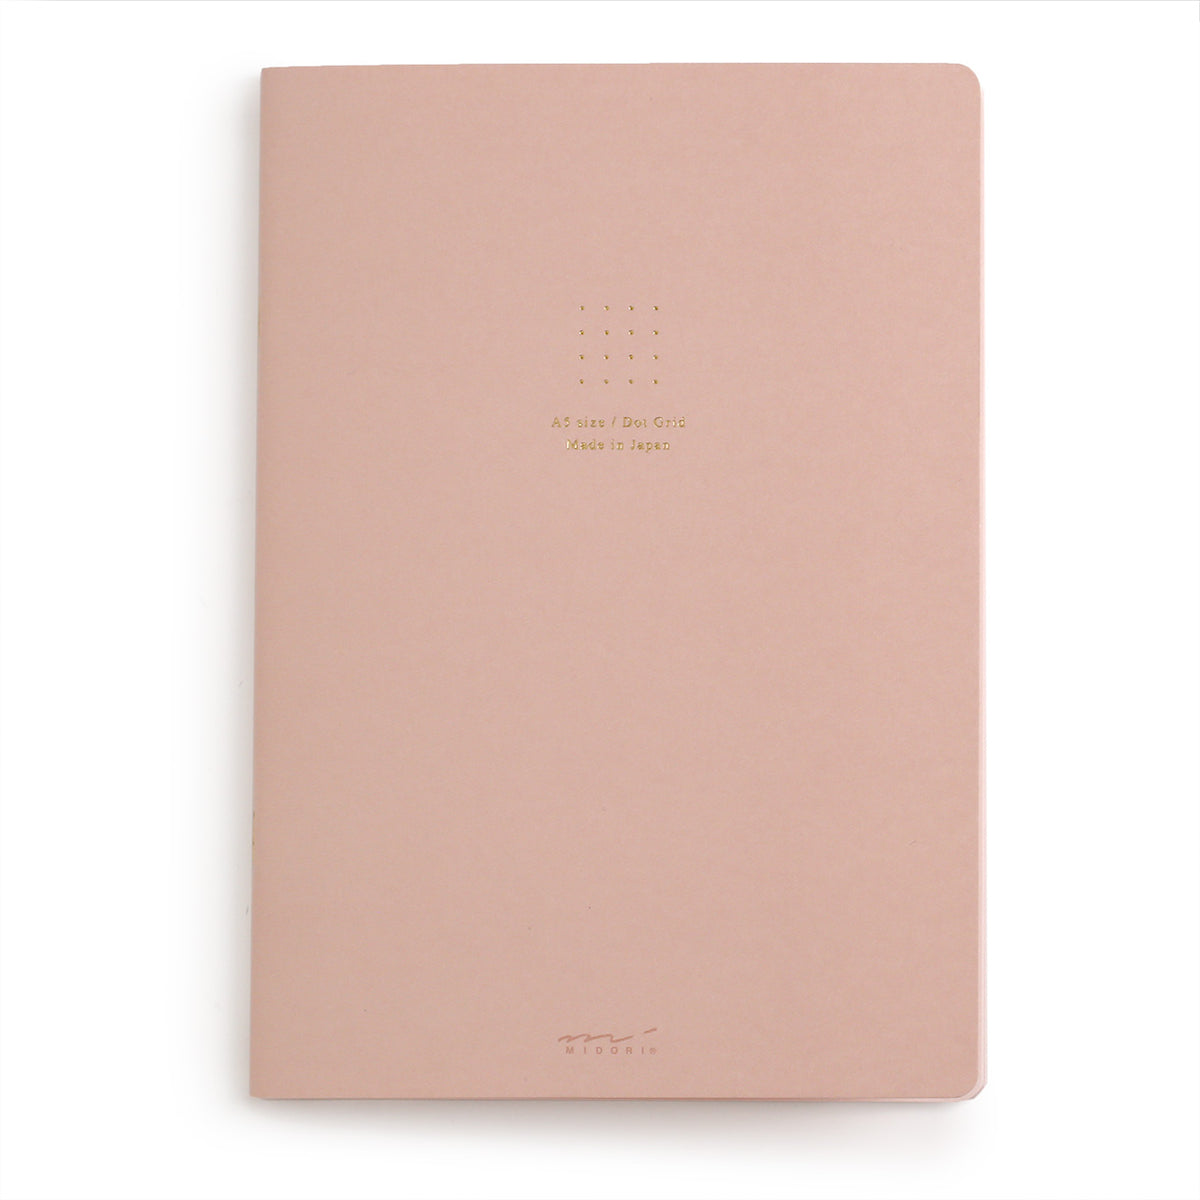 Pink dot grid A5 notebook from midori with gold coloured foil stamping on the cover and gold coloured staples